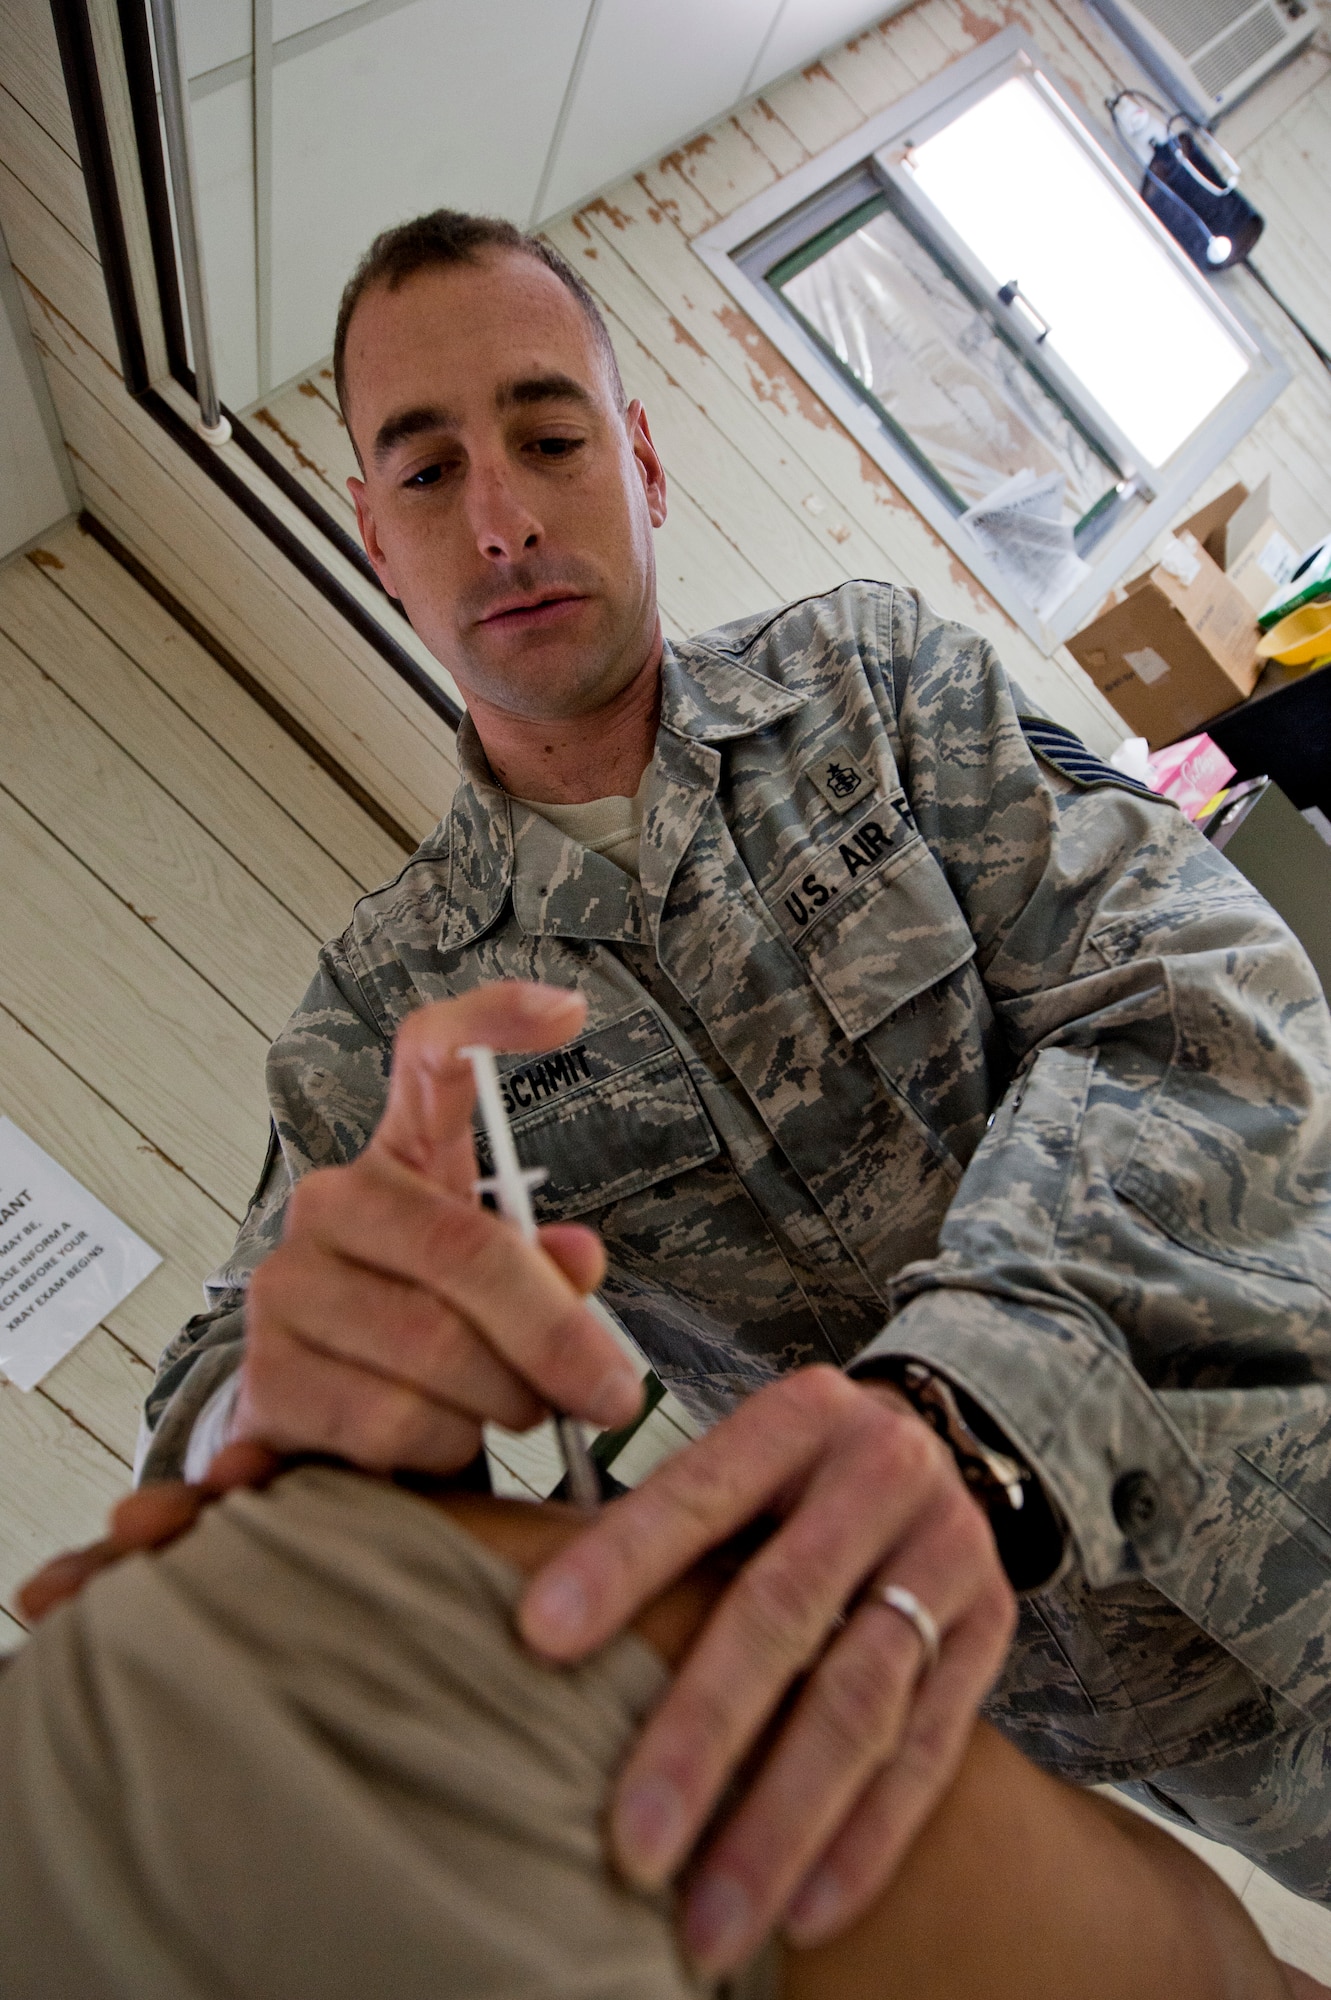 Tech. Sgt. Brian Schmit, 332nd Expeditionary Medical Group medical technician, delivers an immunization shot to a patient in an undisclosed location in Southwest Asia, Jan 19, 2012. Schmit and fellow medical personnel handle all non-emergency services for the 332nd Air Expeditionary Wing.  Schmit is deployed from Spangdahlem Air Base, Germany, and is a native of Rogers Ark. (U.S. Air Force photo by Staff Sgt. Joshua J. Garcia/Released) 